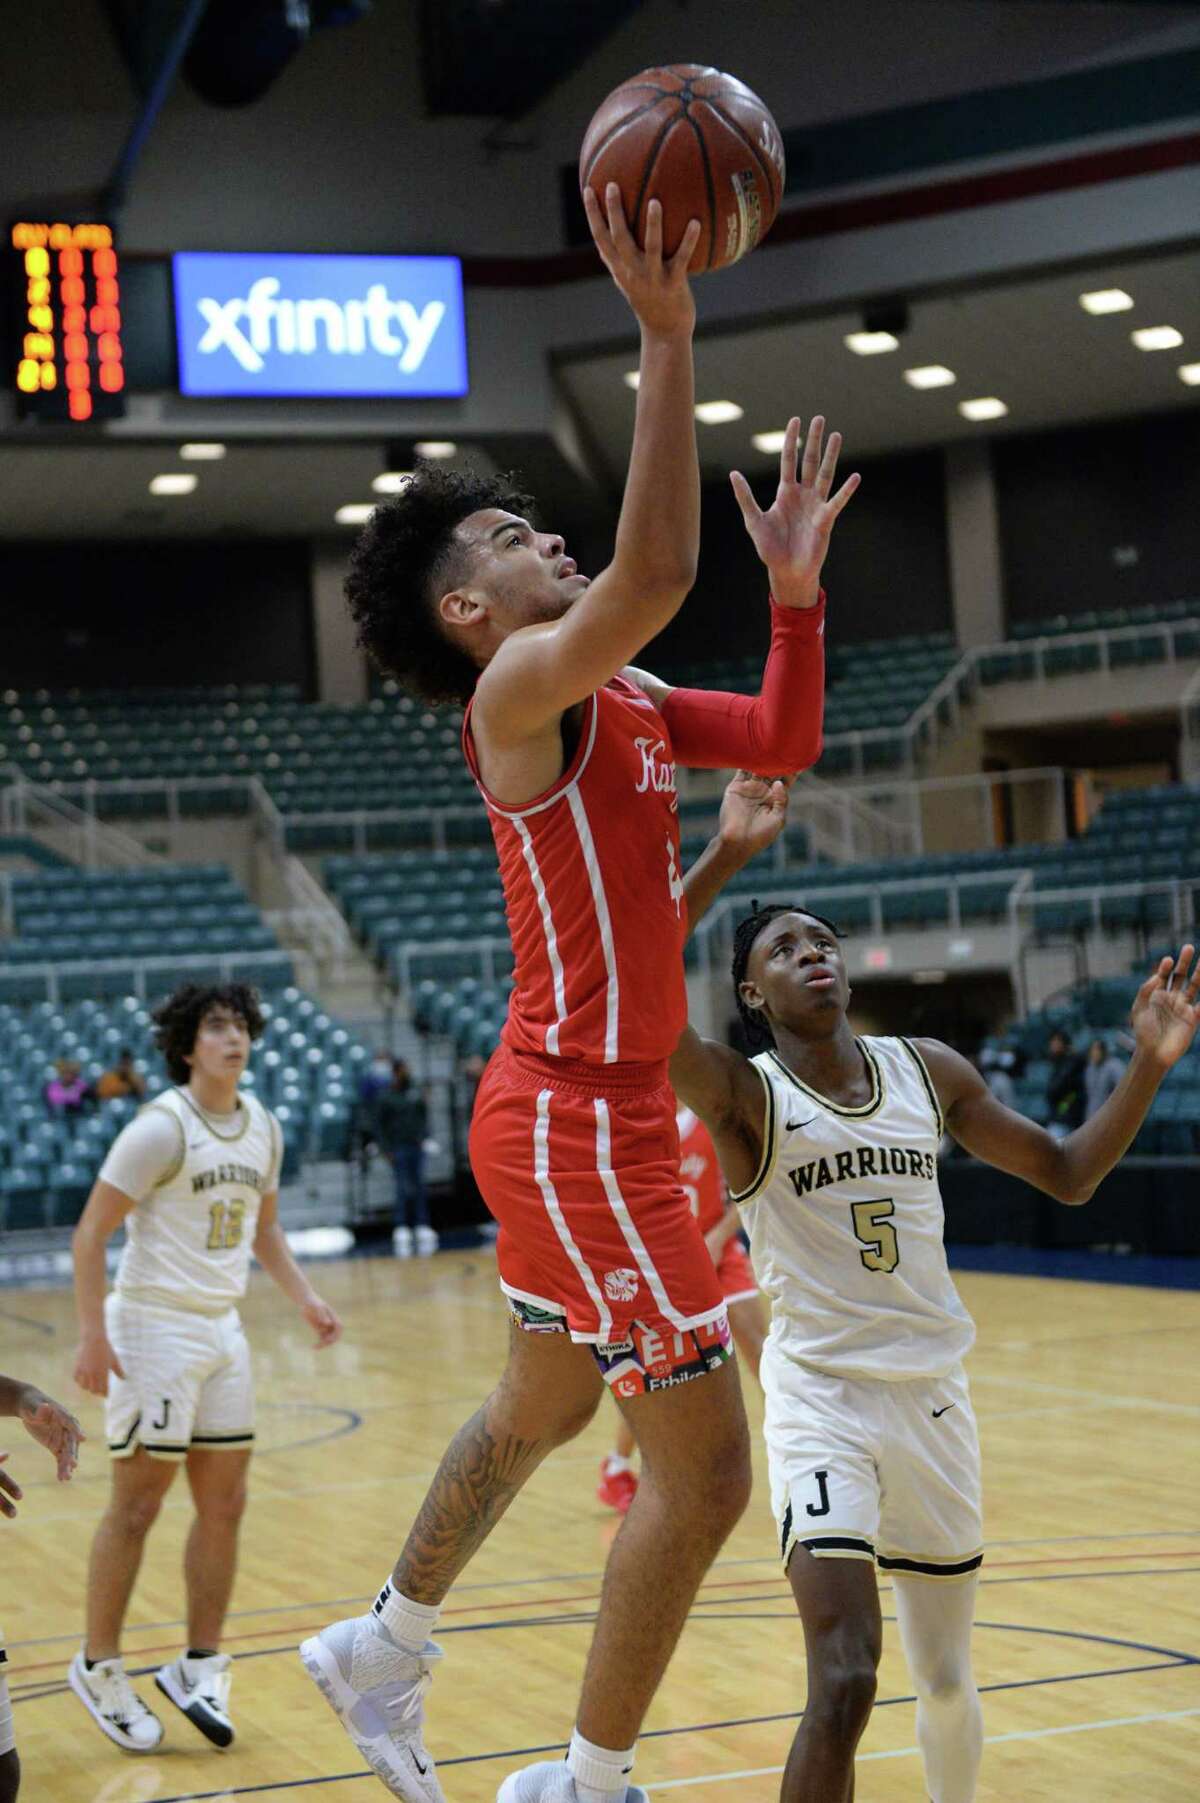 Dayvaughn Froe (4) of Katy drives to the basket in the second half of a pool game between the Katy Tigers and the Jordan Warriors during the Katy ISD Basketball Classic on Thursday, December 2, 2021 at the Leonard Merrill Center, Katy, TX.